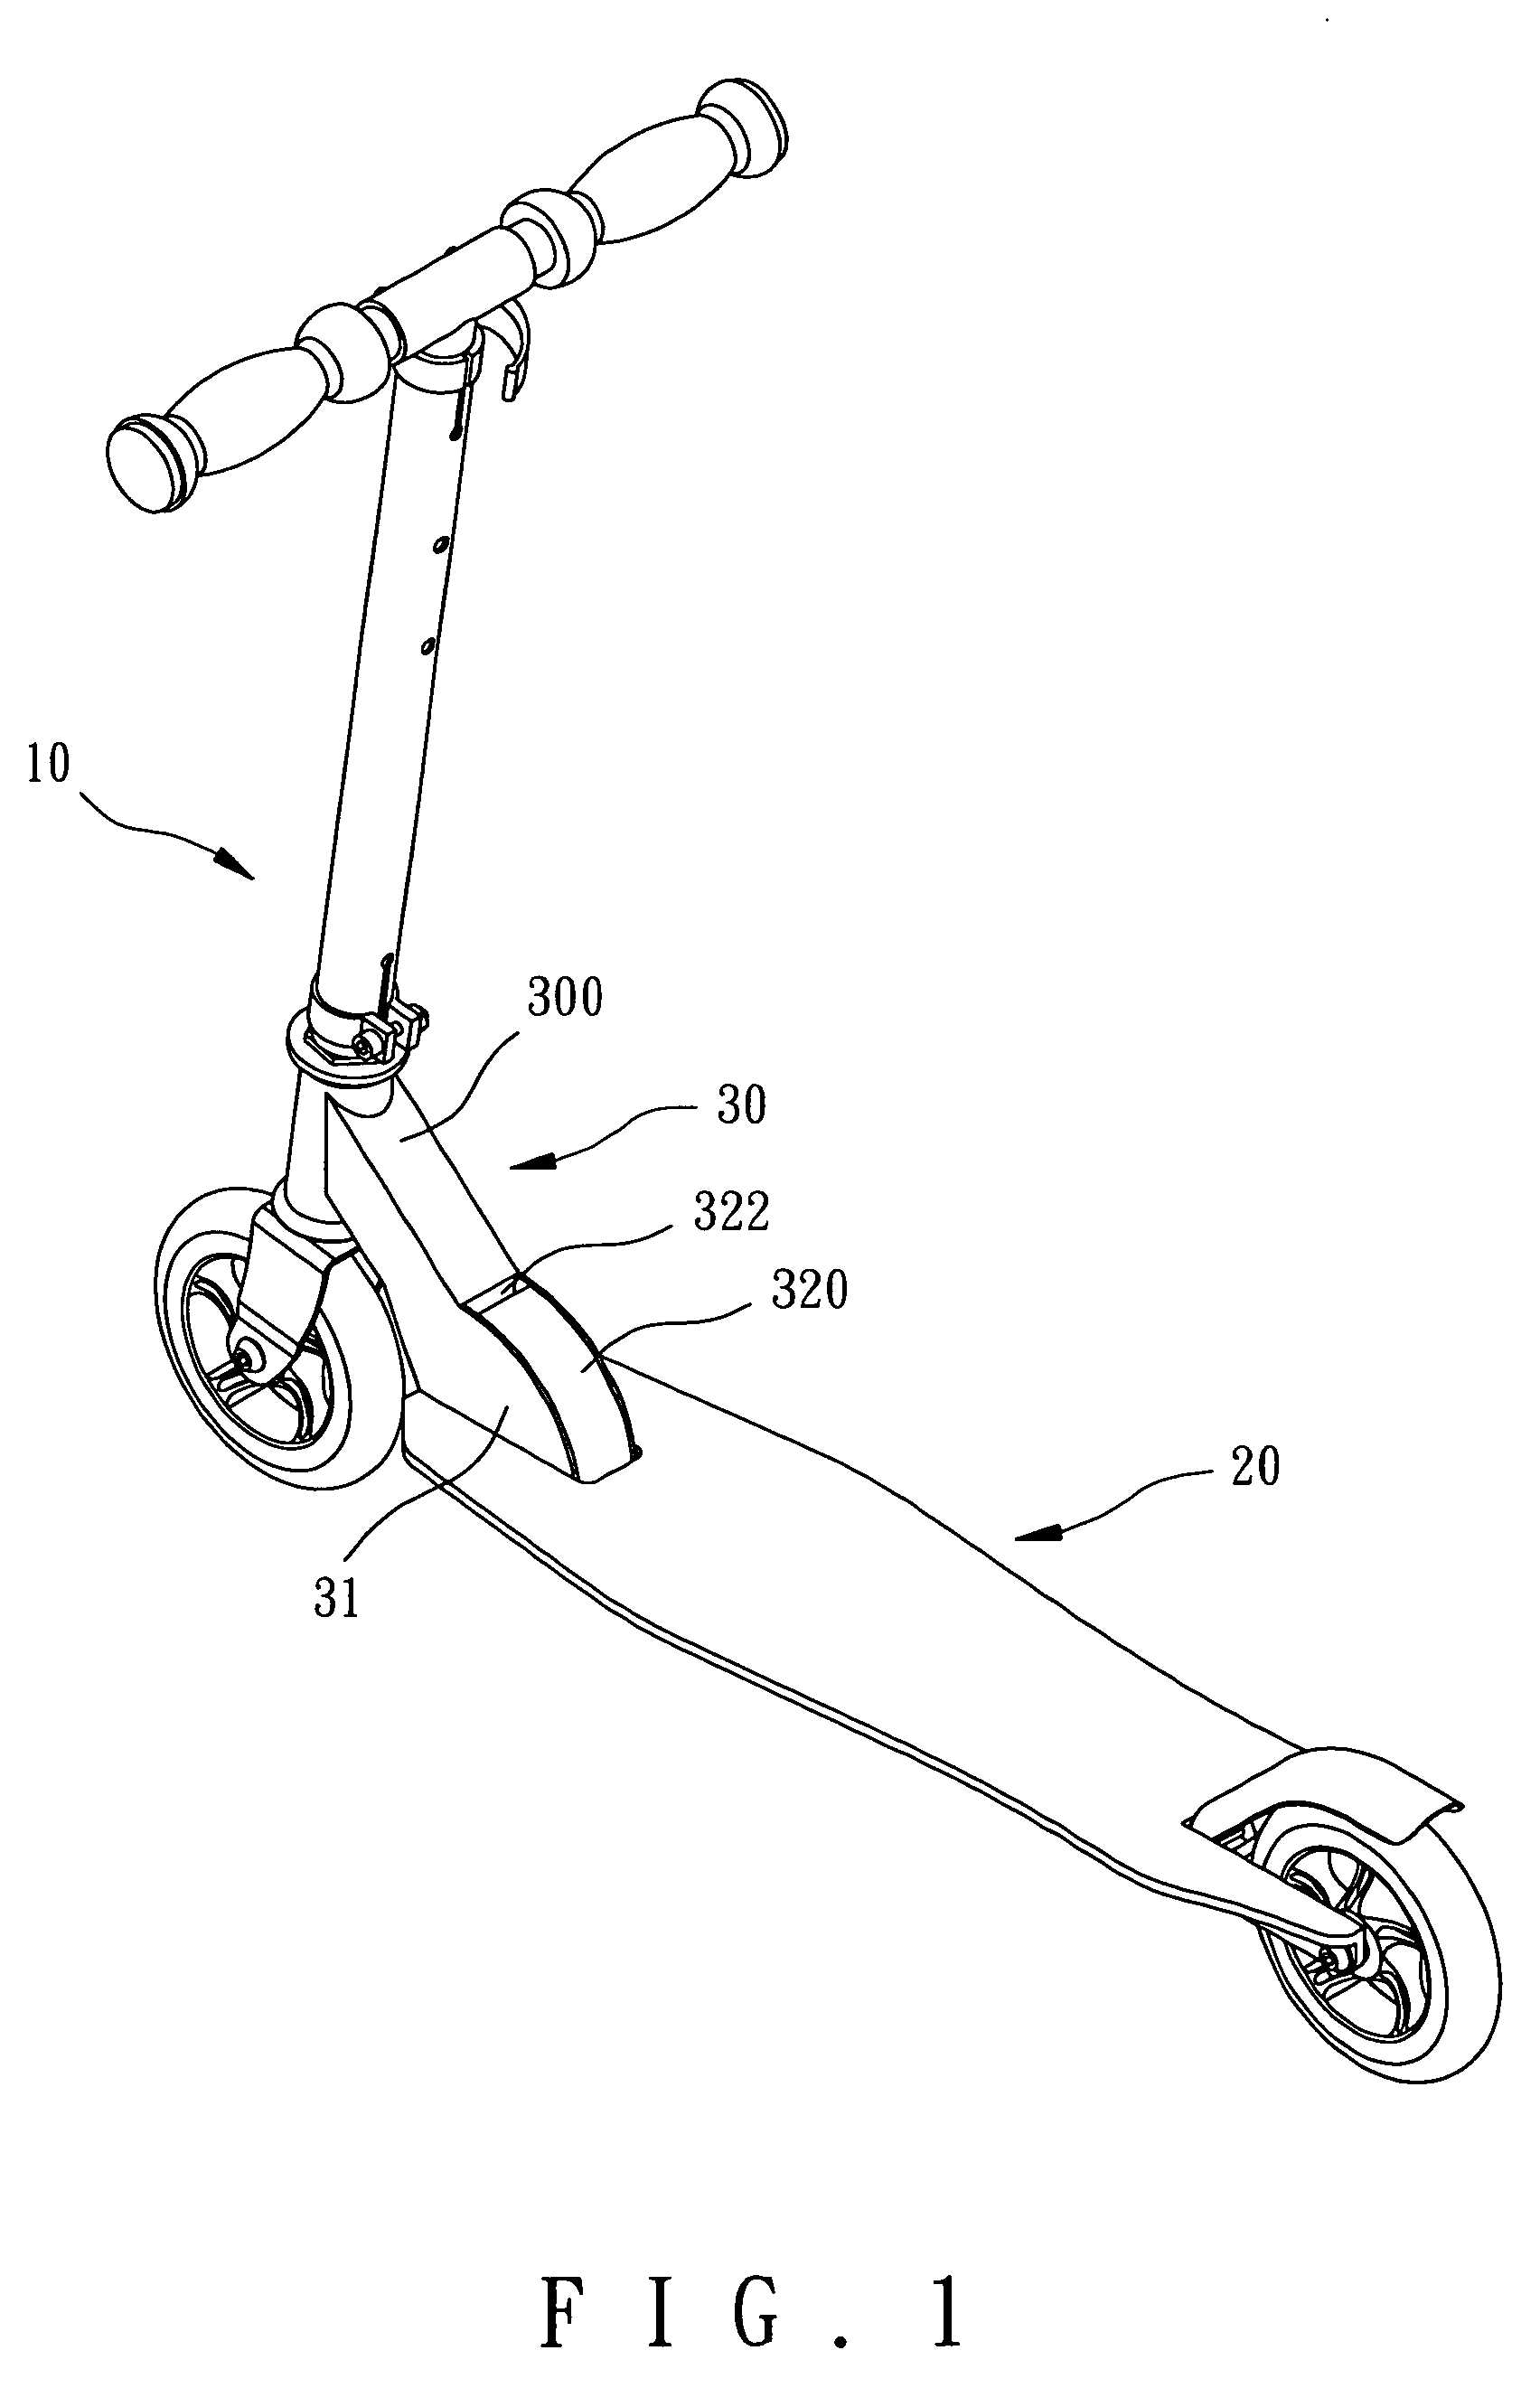 Folding device for scooters